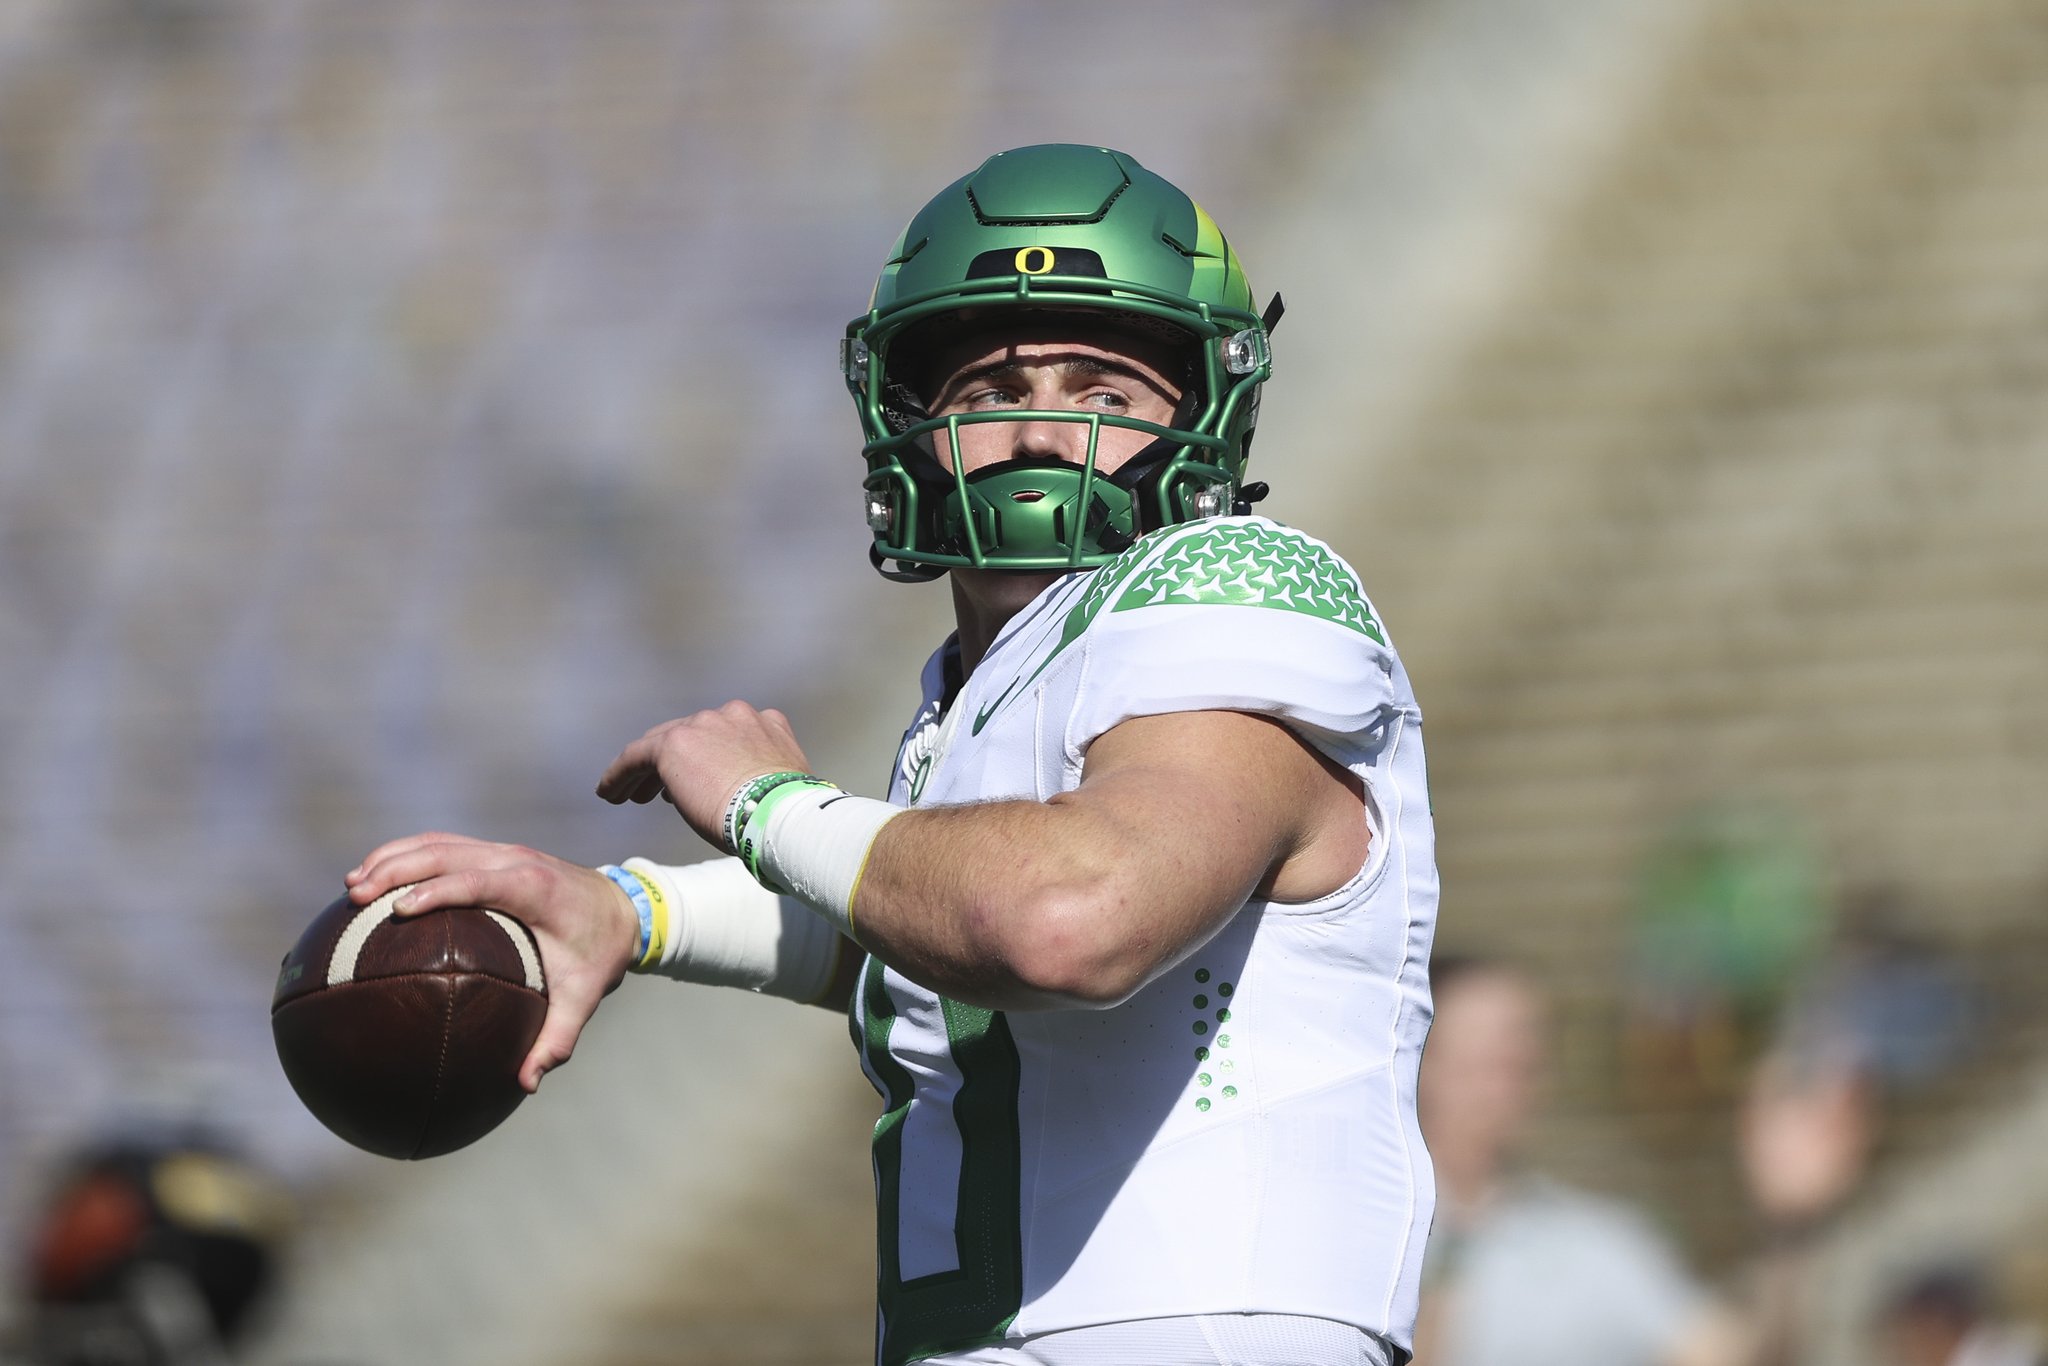 BO NIX ANNOUNCES HIS RETURN TO OREGON FOR ONE FINAL SEASON “There’s